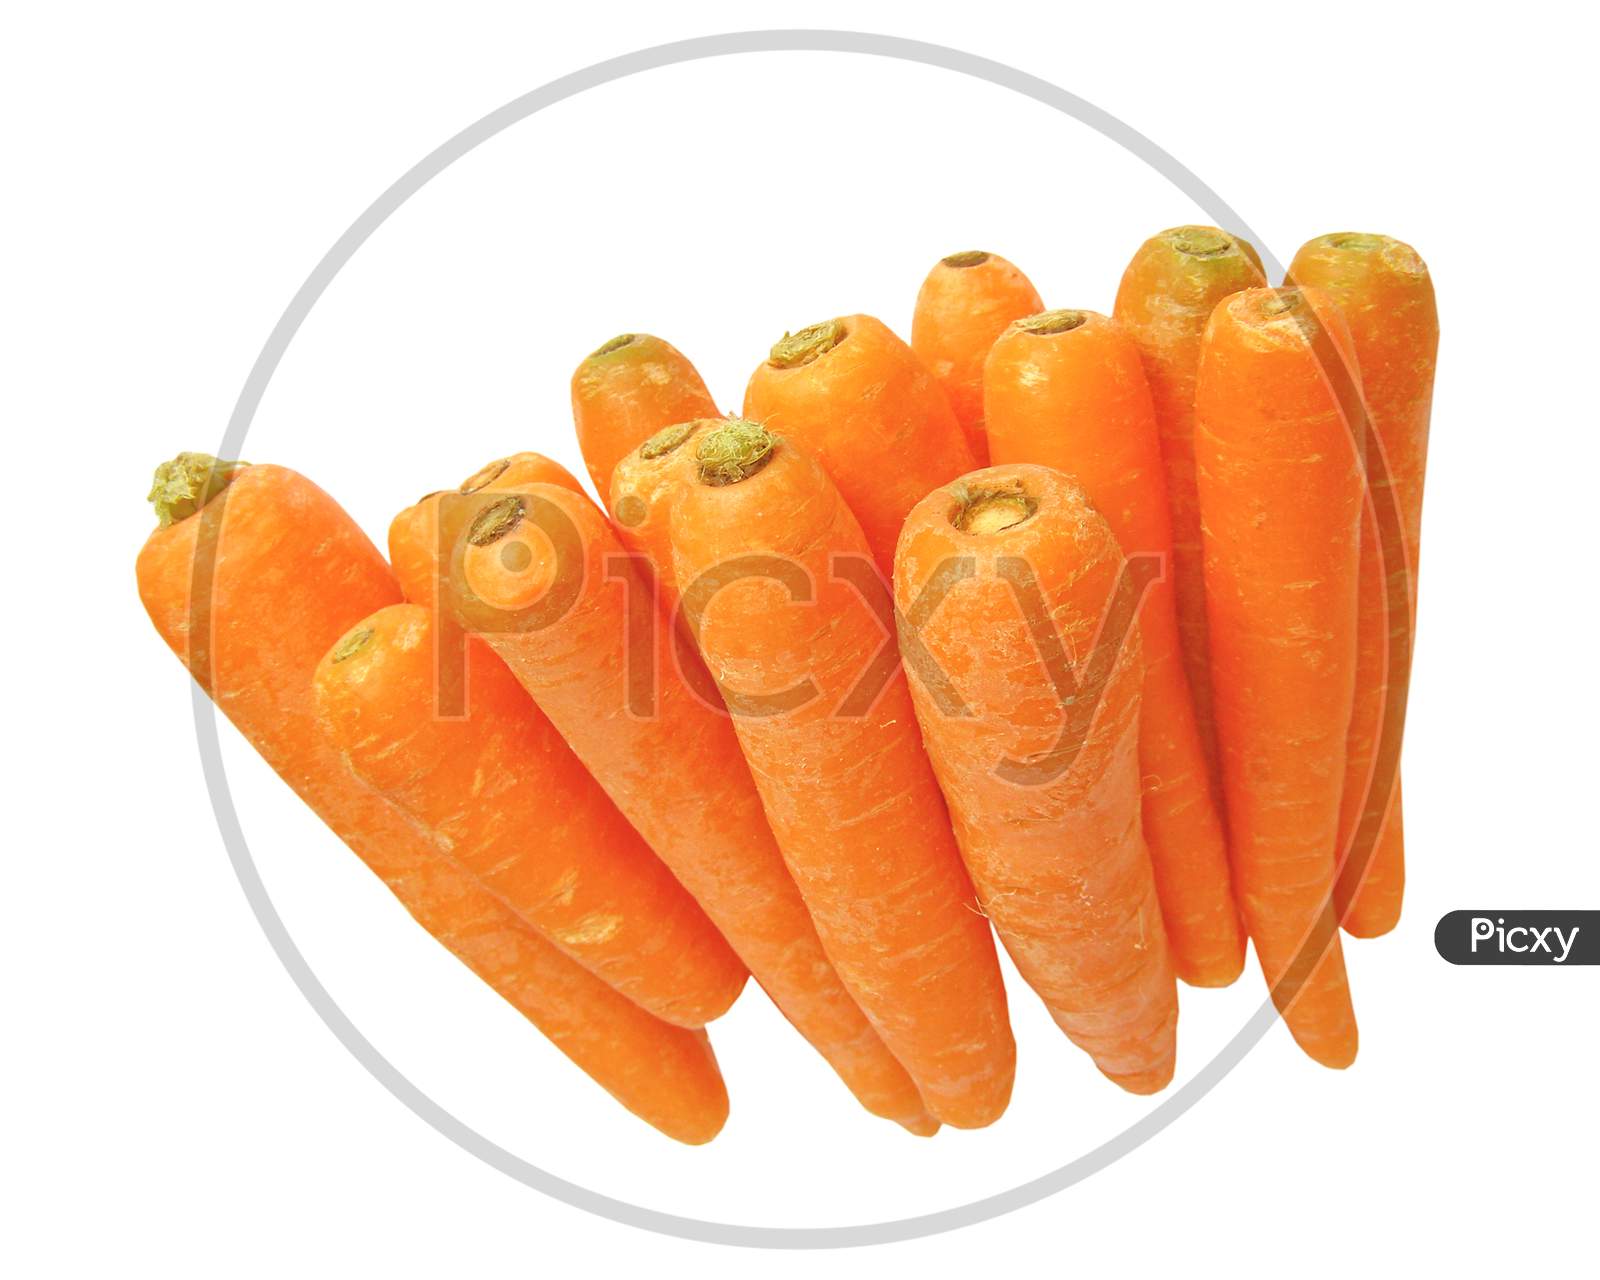 Carrots Isolated Over White